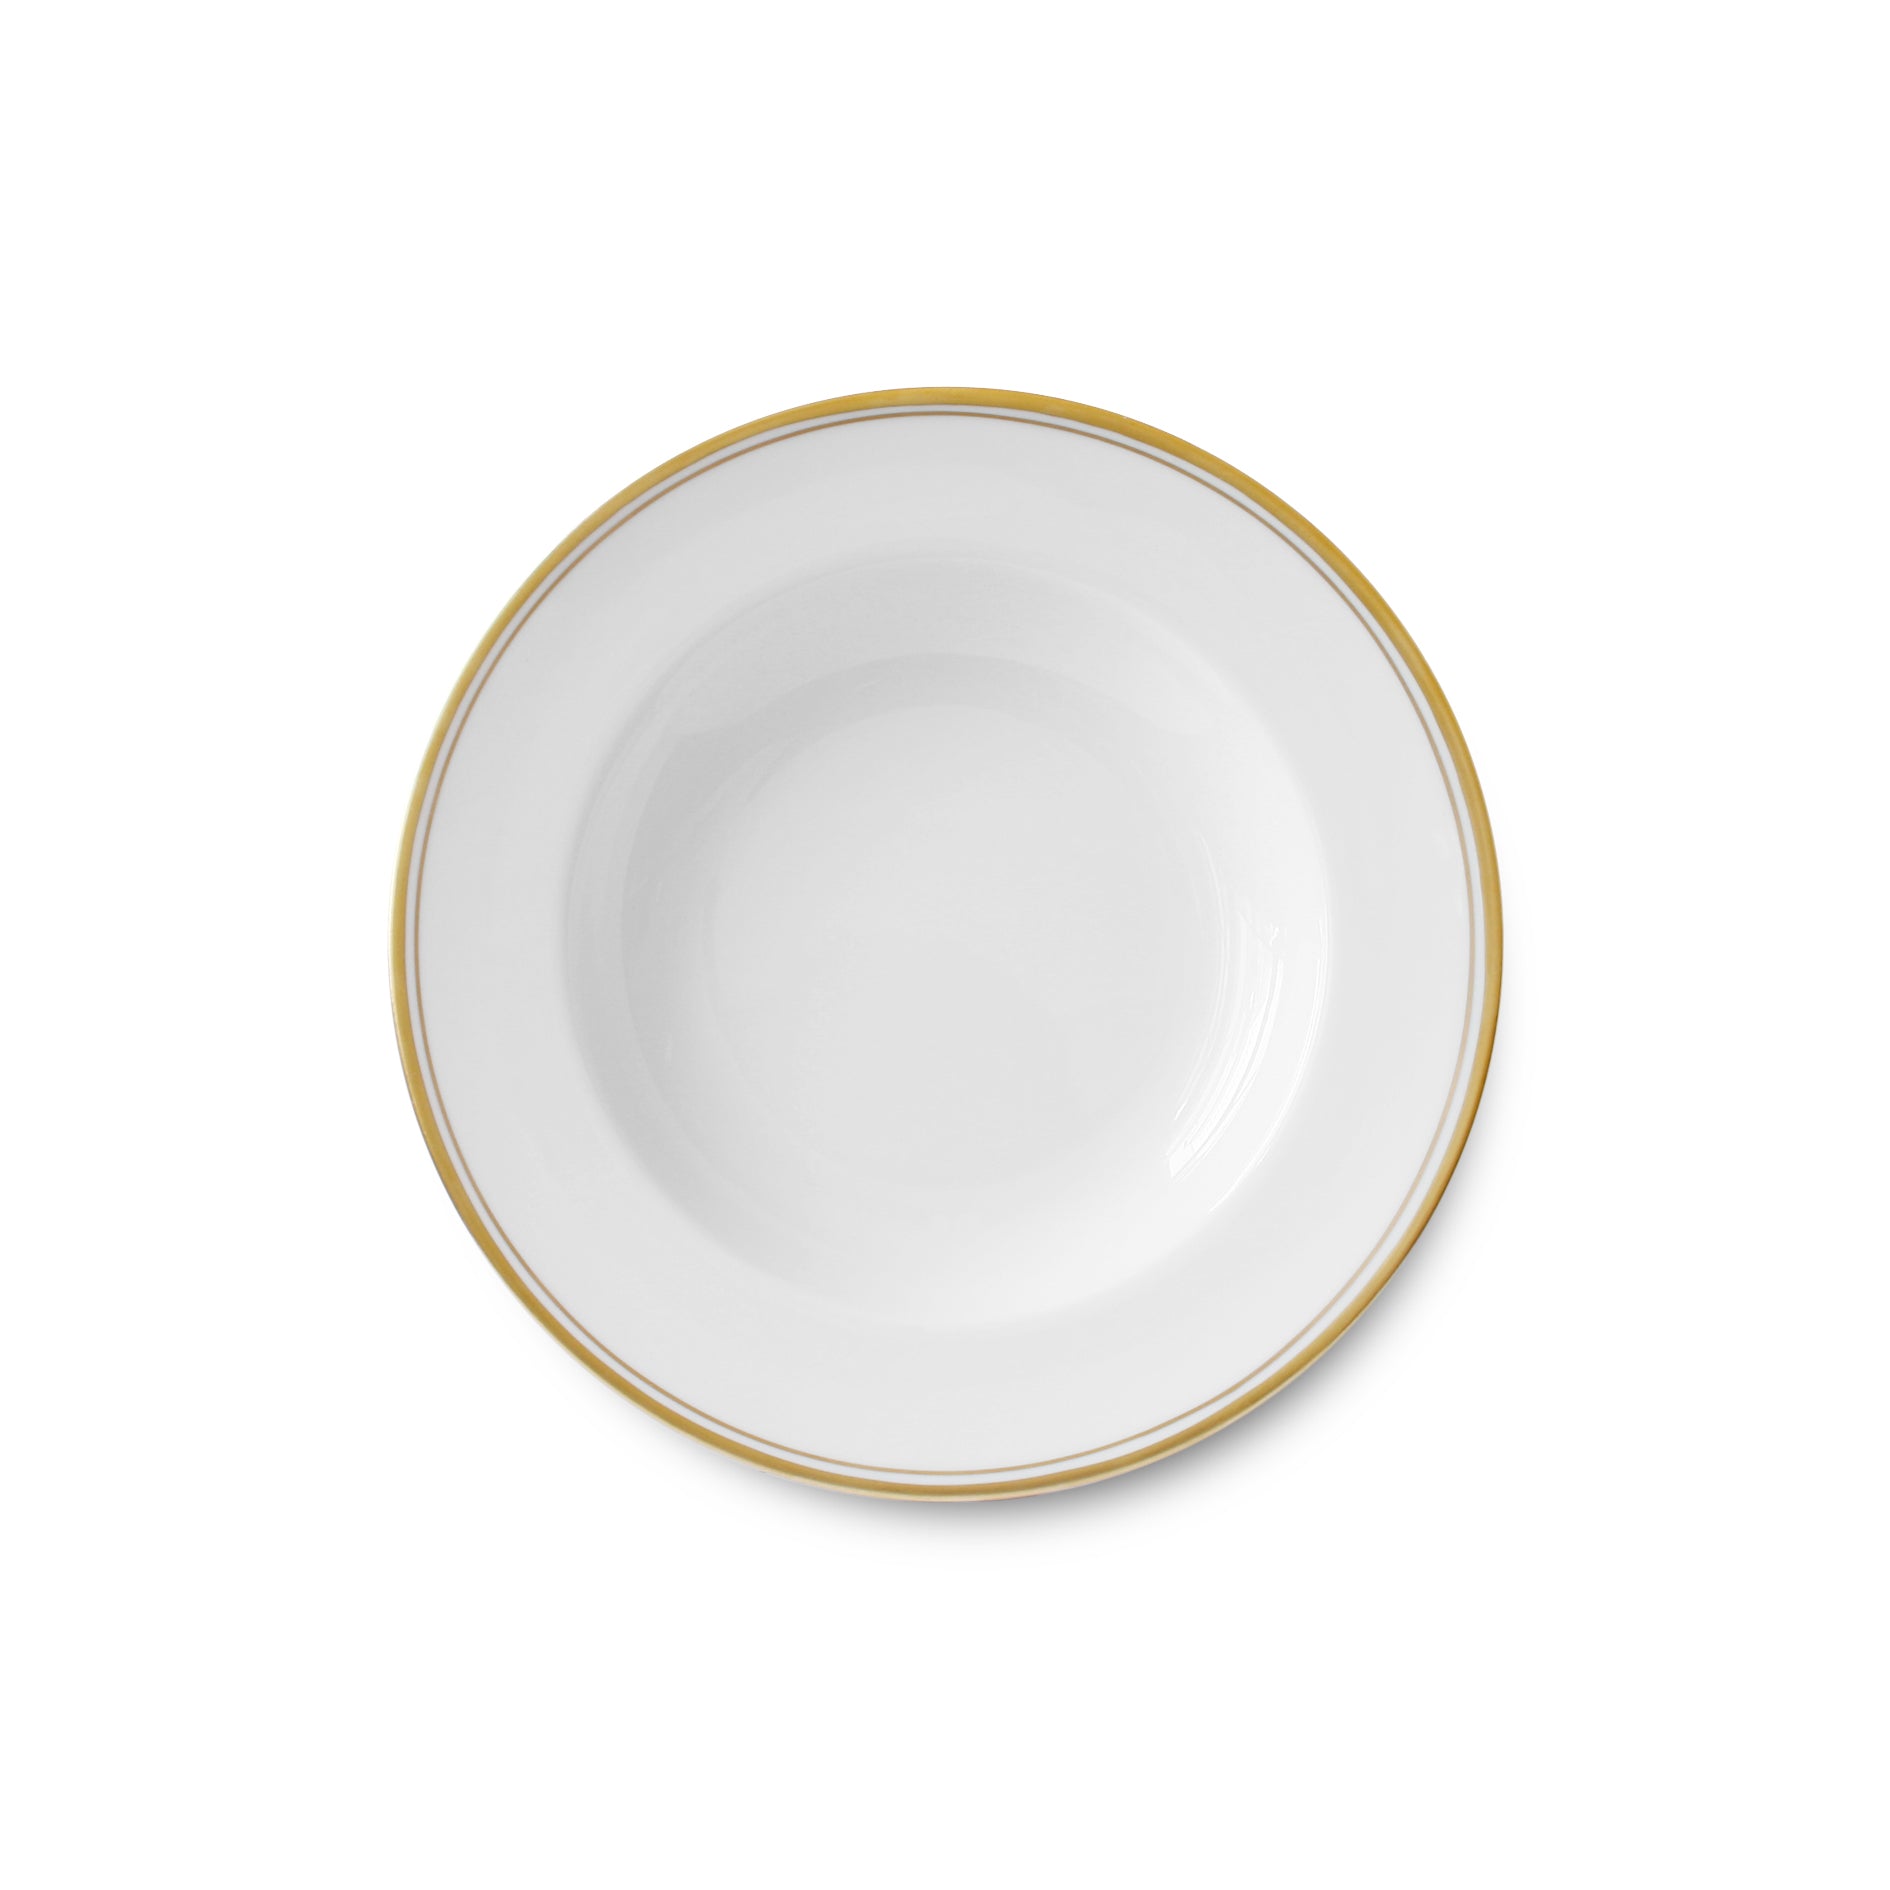 Double filet or - Soup plate
